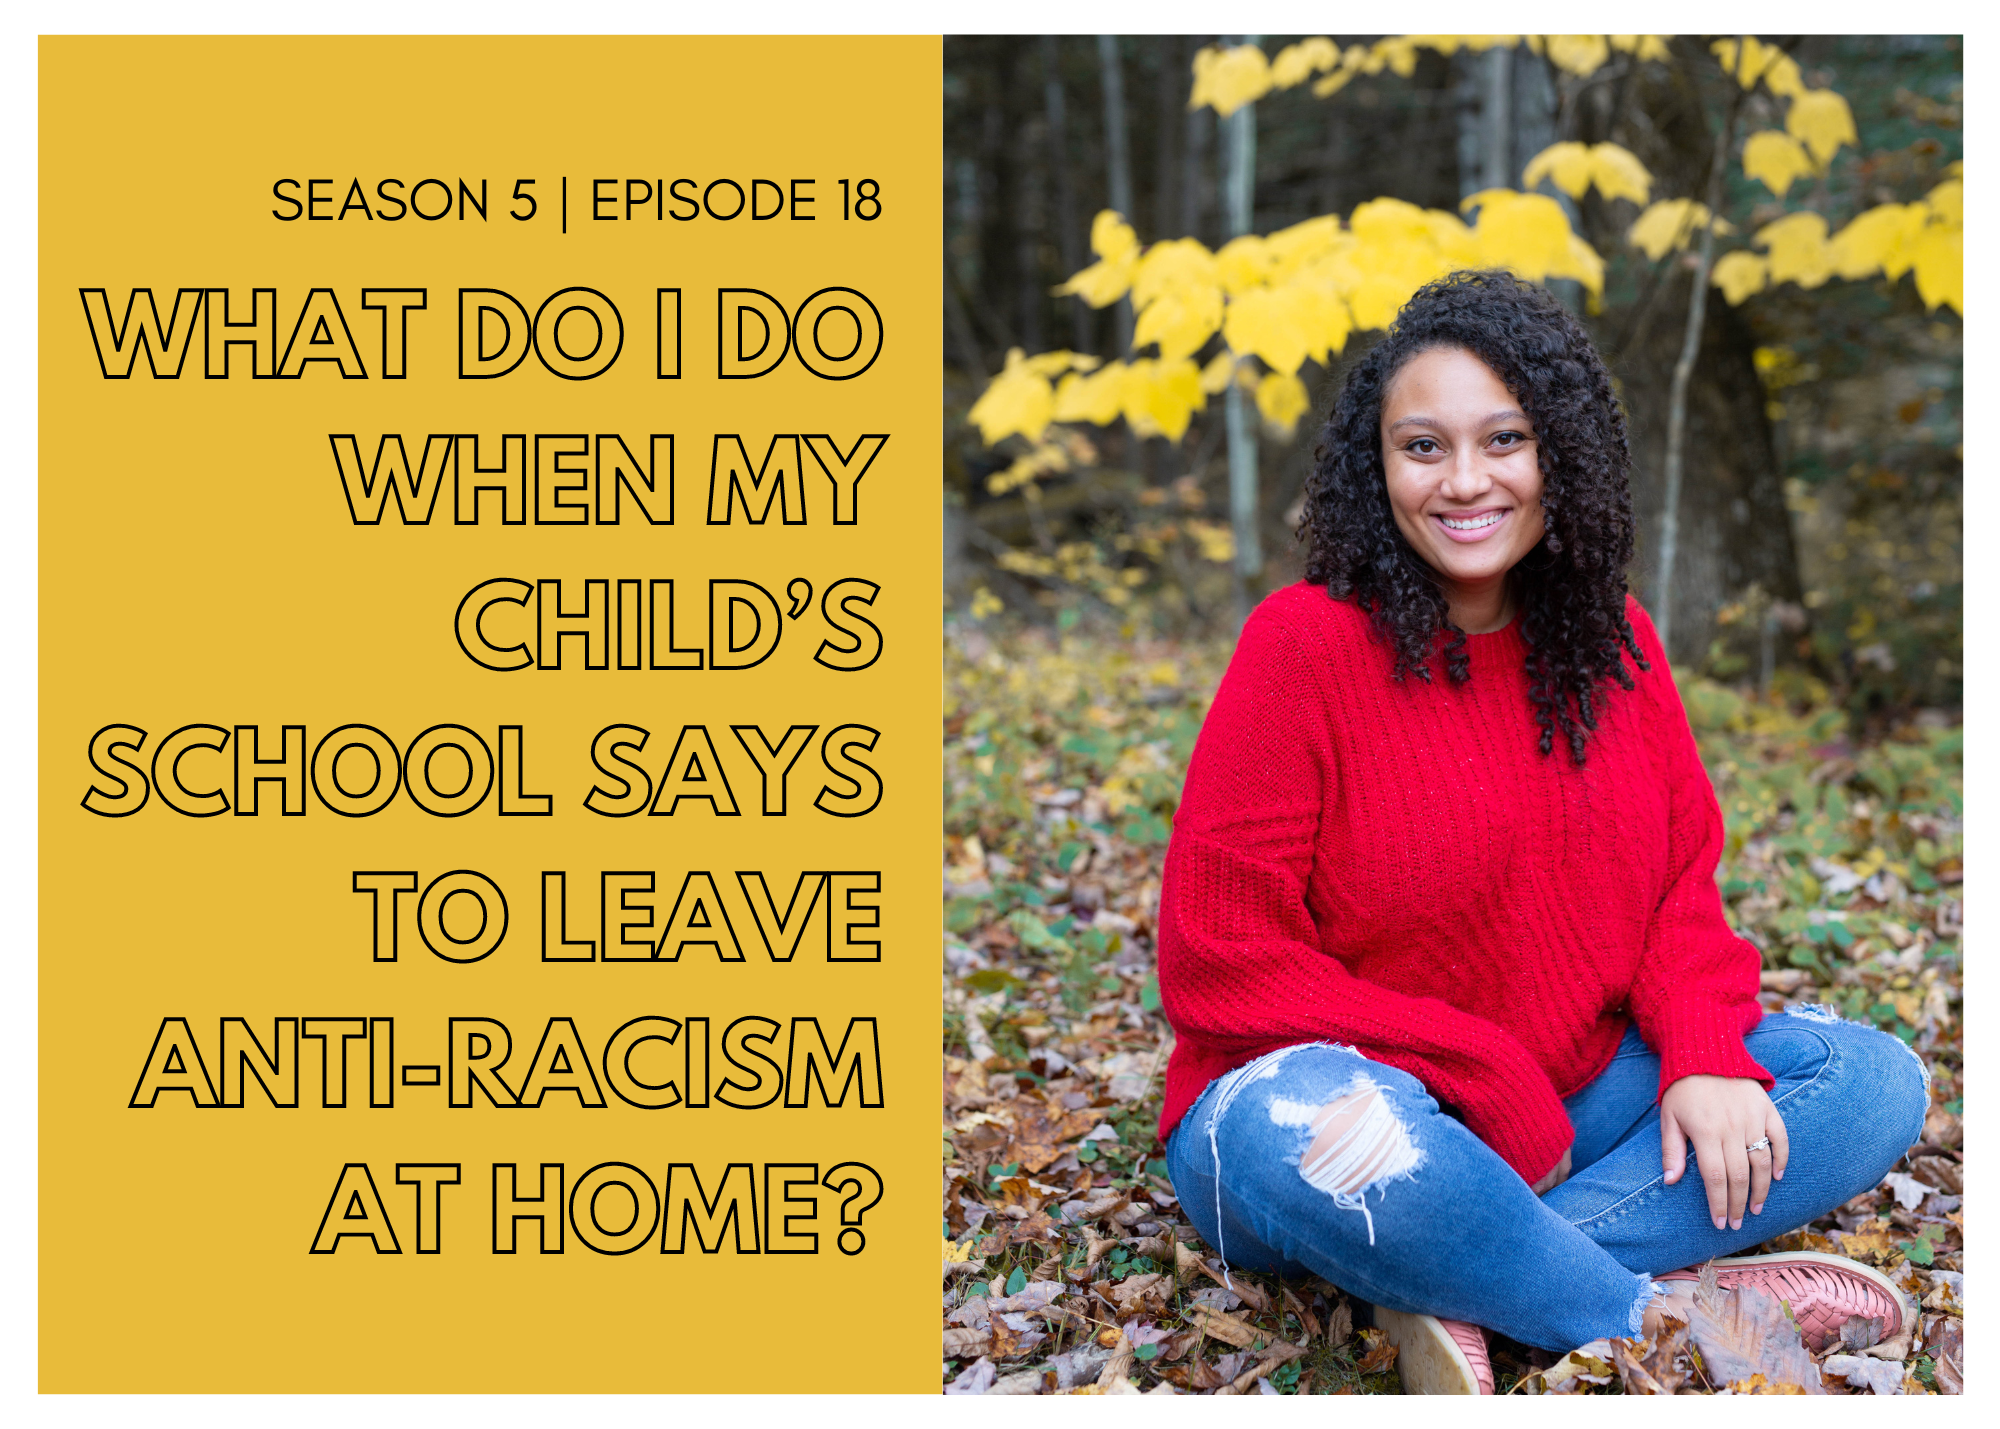 What Do I Do When My Child’s School Says to Leave Anti-Racism at Home?